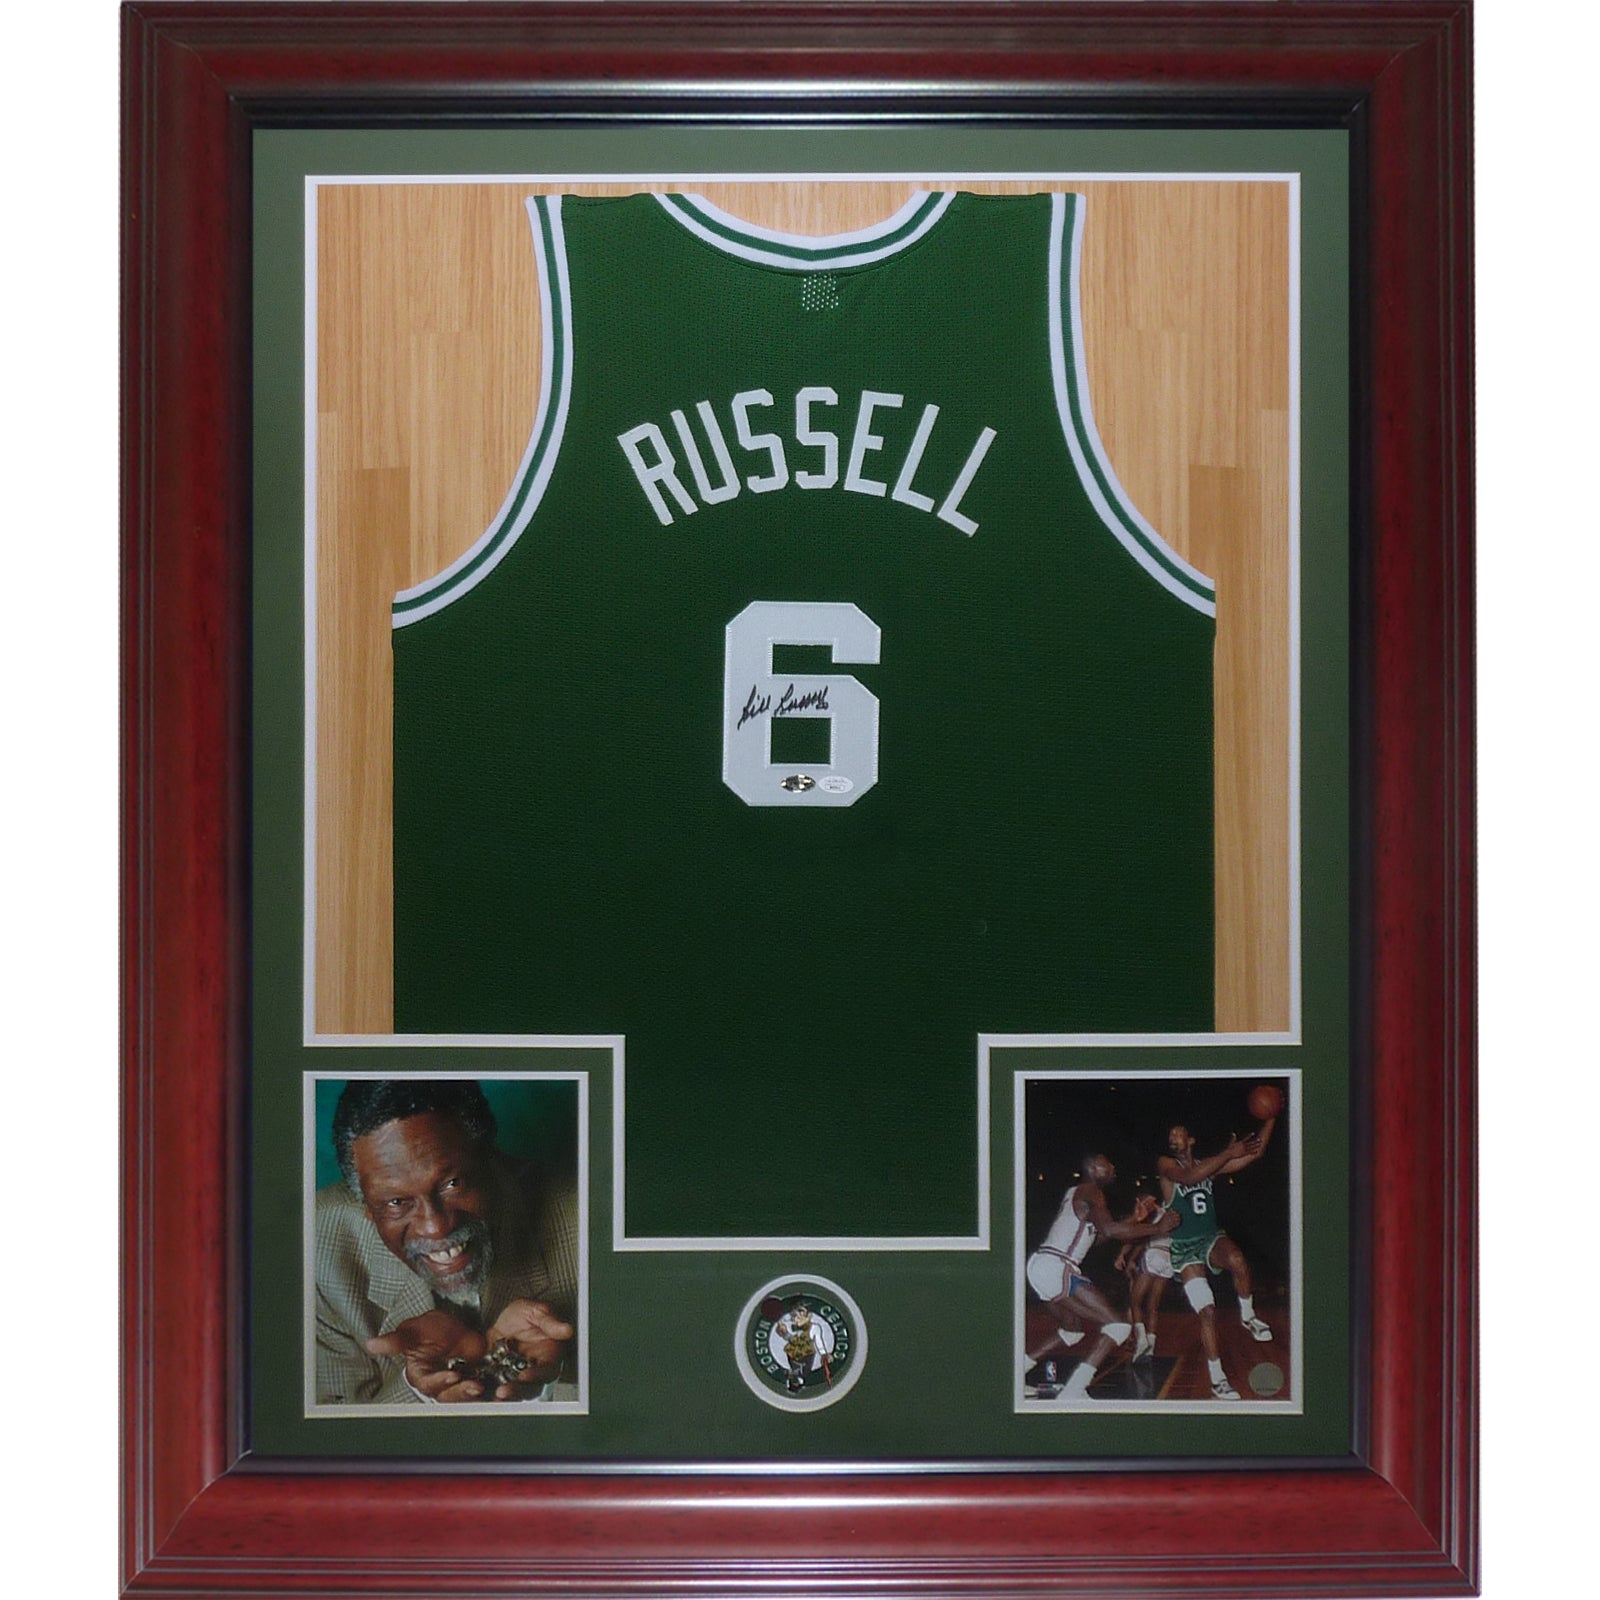 How to Professionally Frame a Basketball Jersey in a Sports